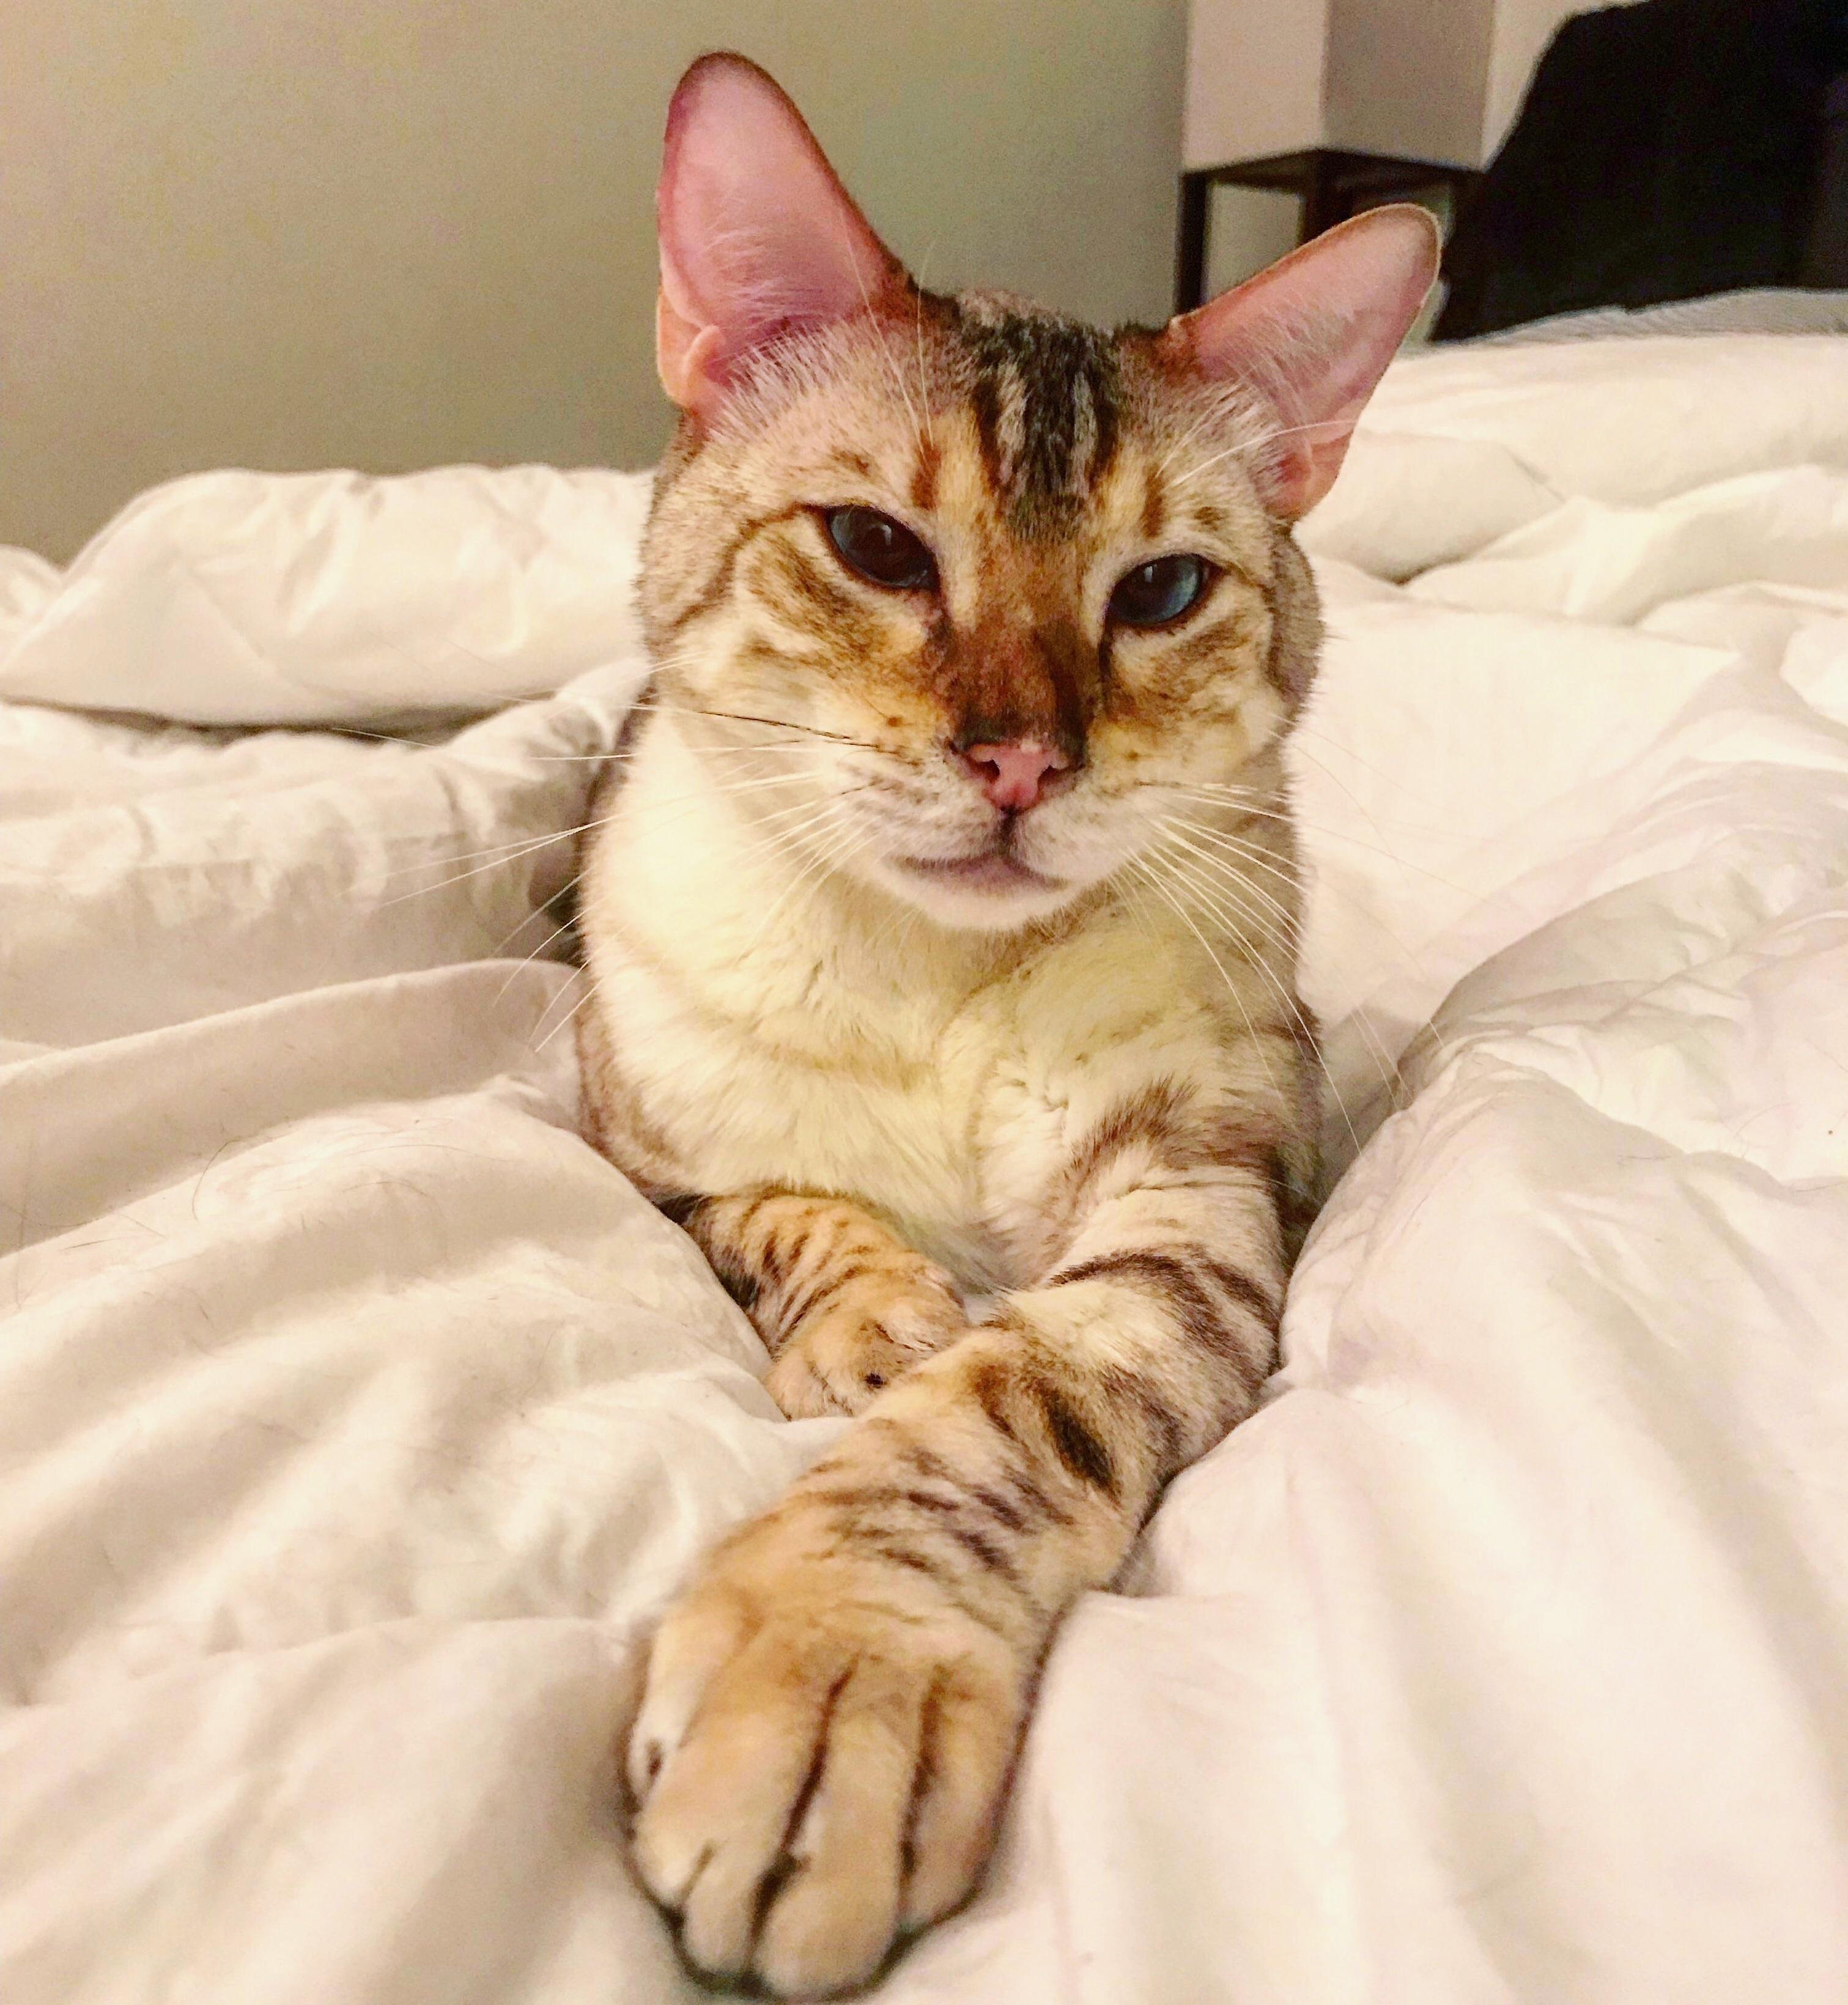 Meet fawkes the snow bengal. i never knew a cat could be so smart yet so dumb, we love him either way.